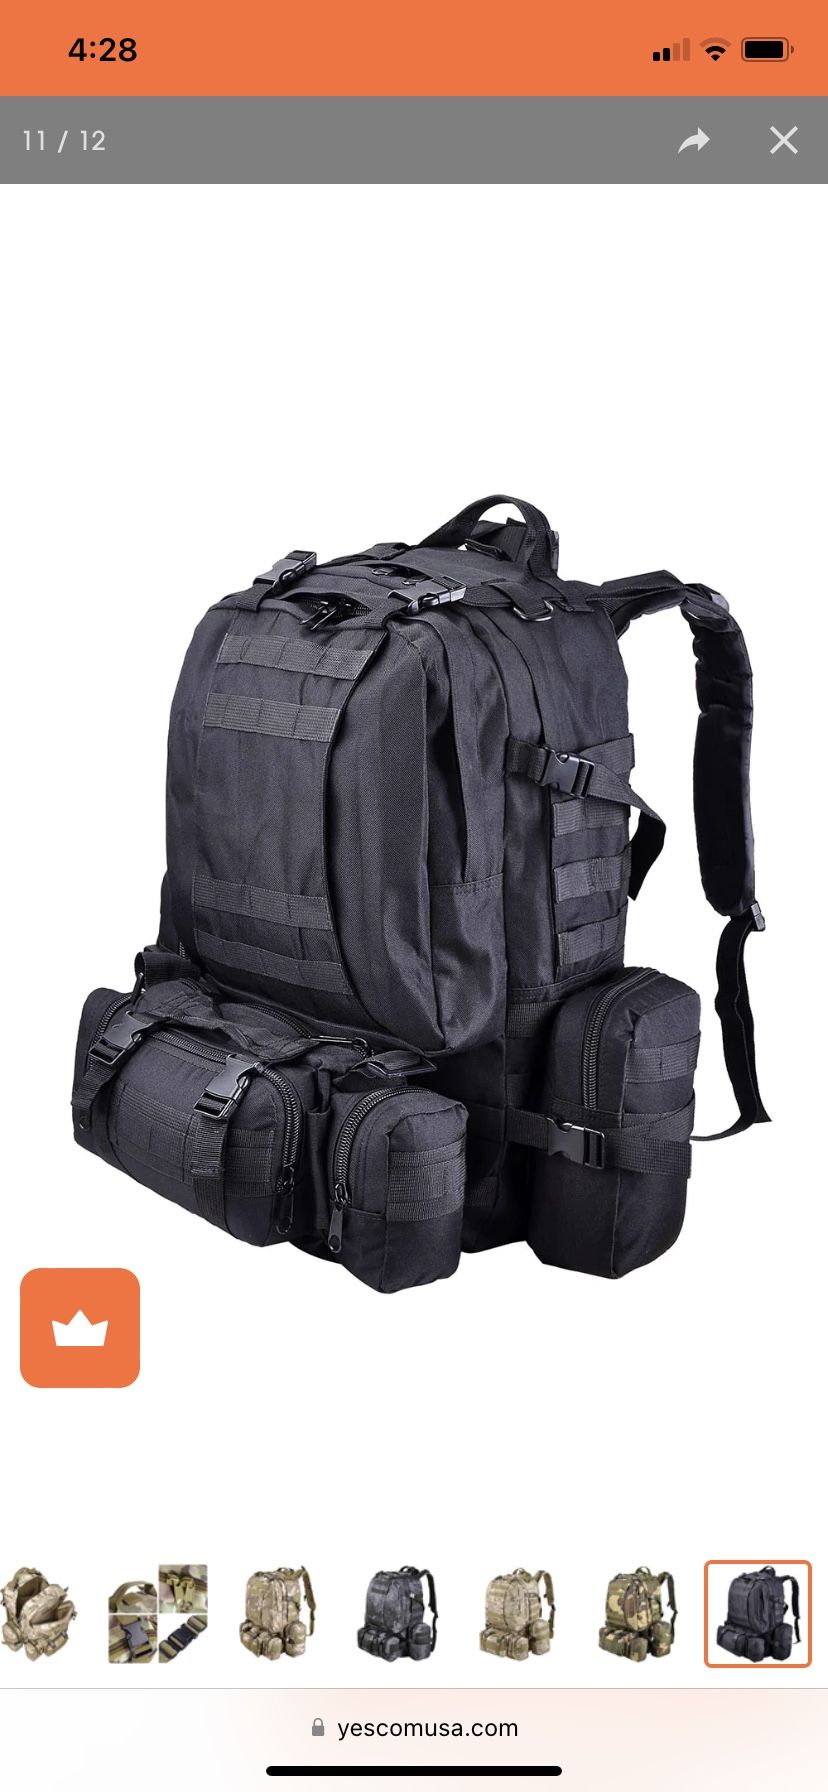 55L Camouflage Backpack Accessories Backpack Travel Hiking Camping Army Army Black